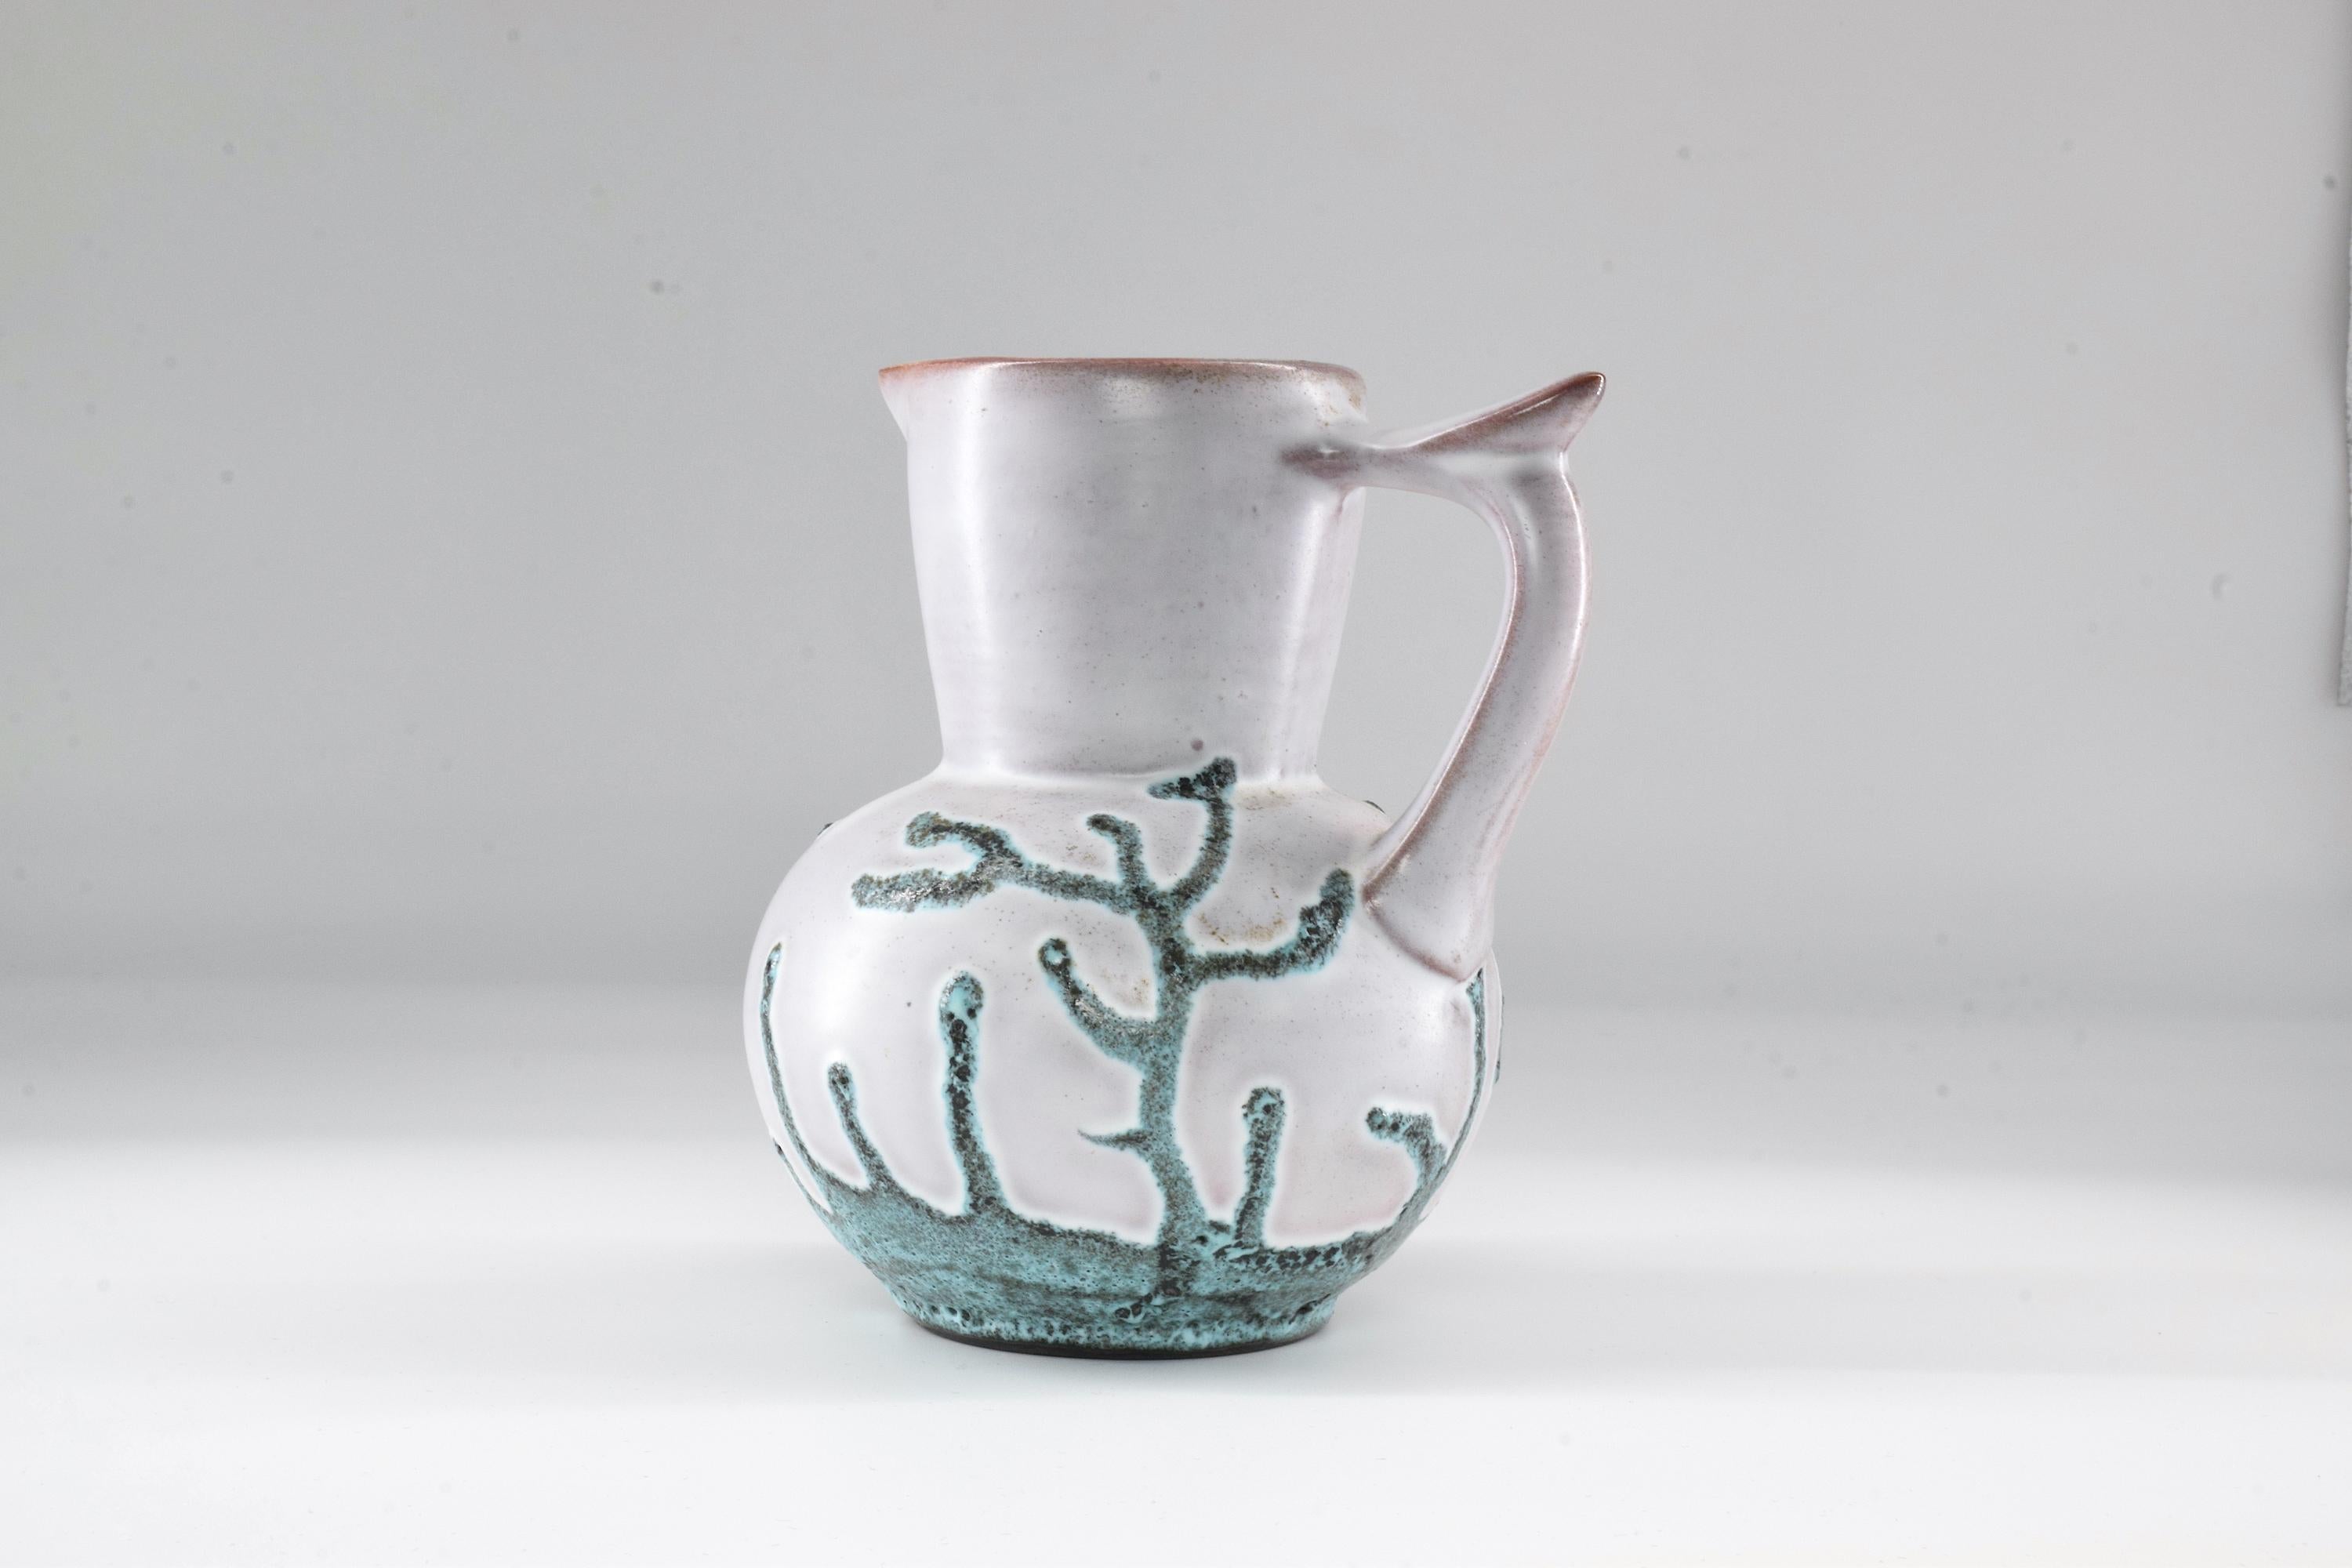 This is an original ceramic pitcher designed by French designer Bruno Dose, for the prestigious Poterie du Breuil. A pretty decorative object for any living area, with its soft pattern made of green coral-like branches and unique handle. Impeccable